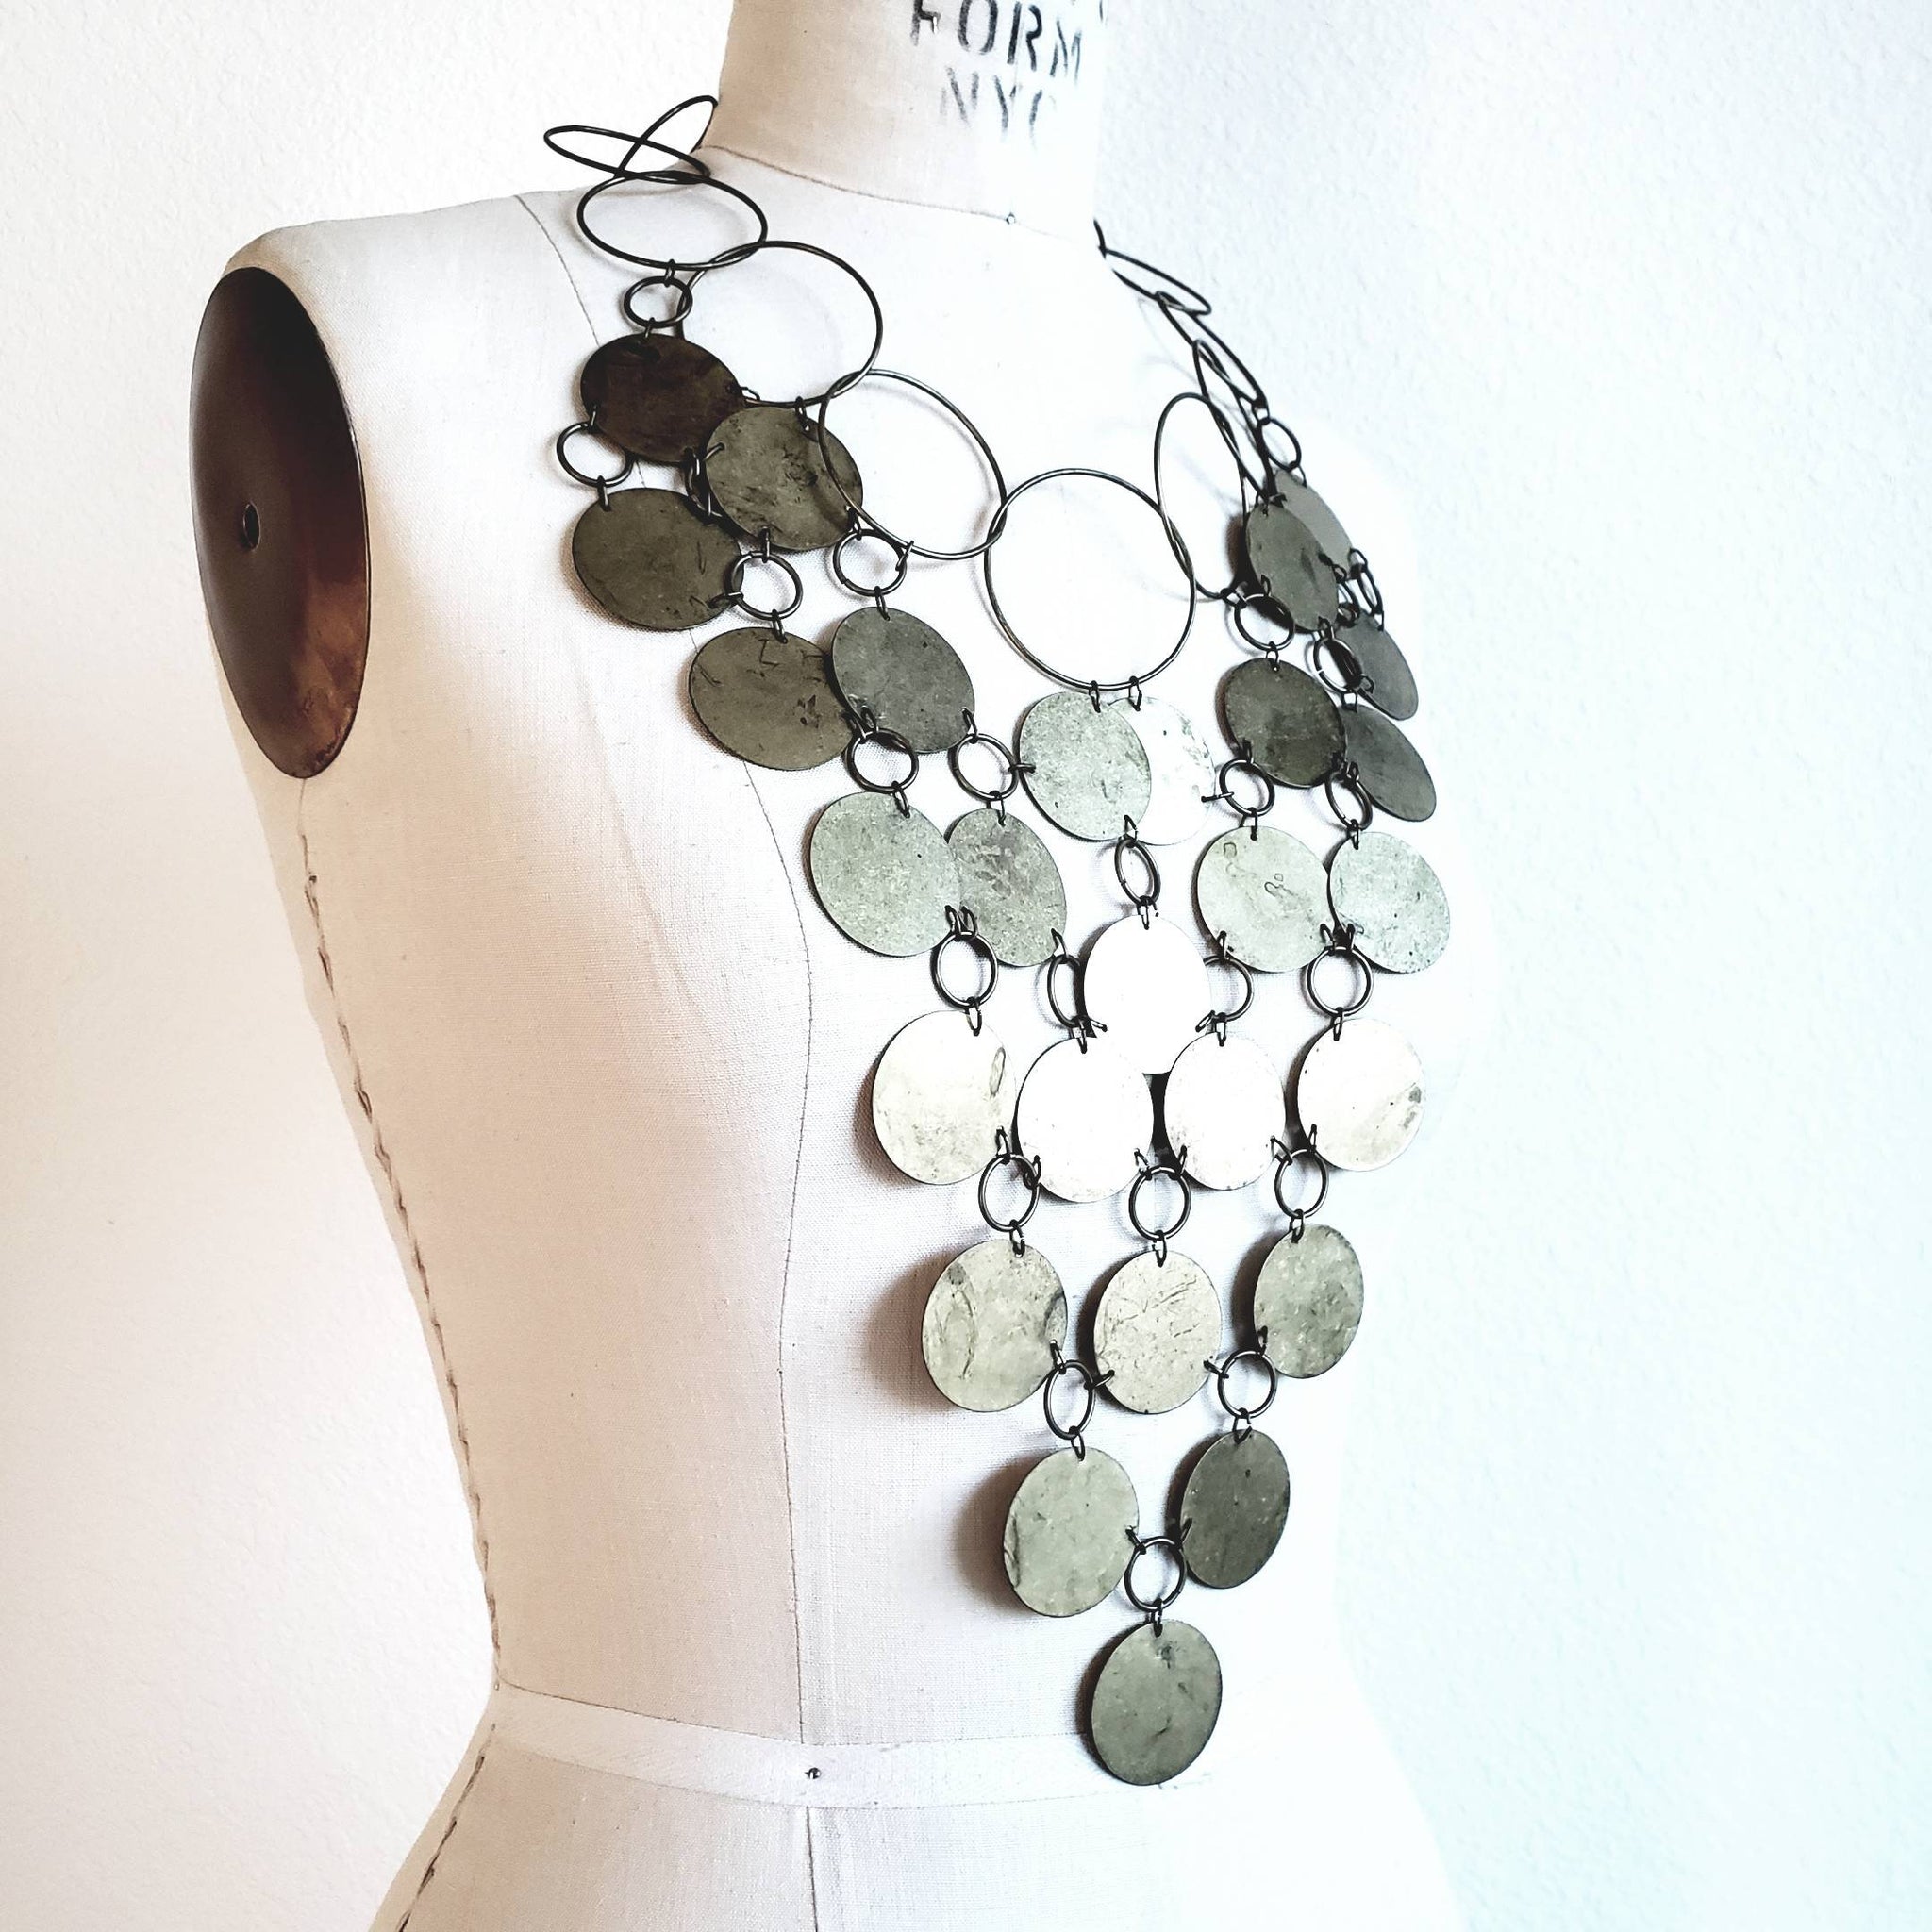 Vintage Metal Disc Bib Statement Necklace and Earring Set - ChicCityVintage